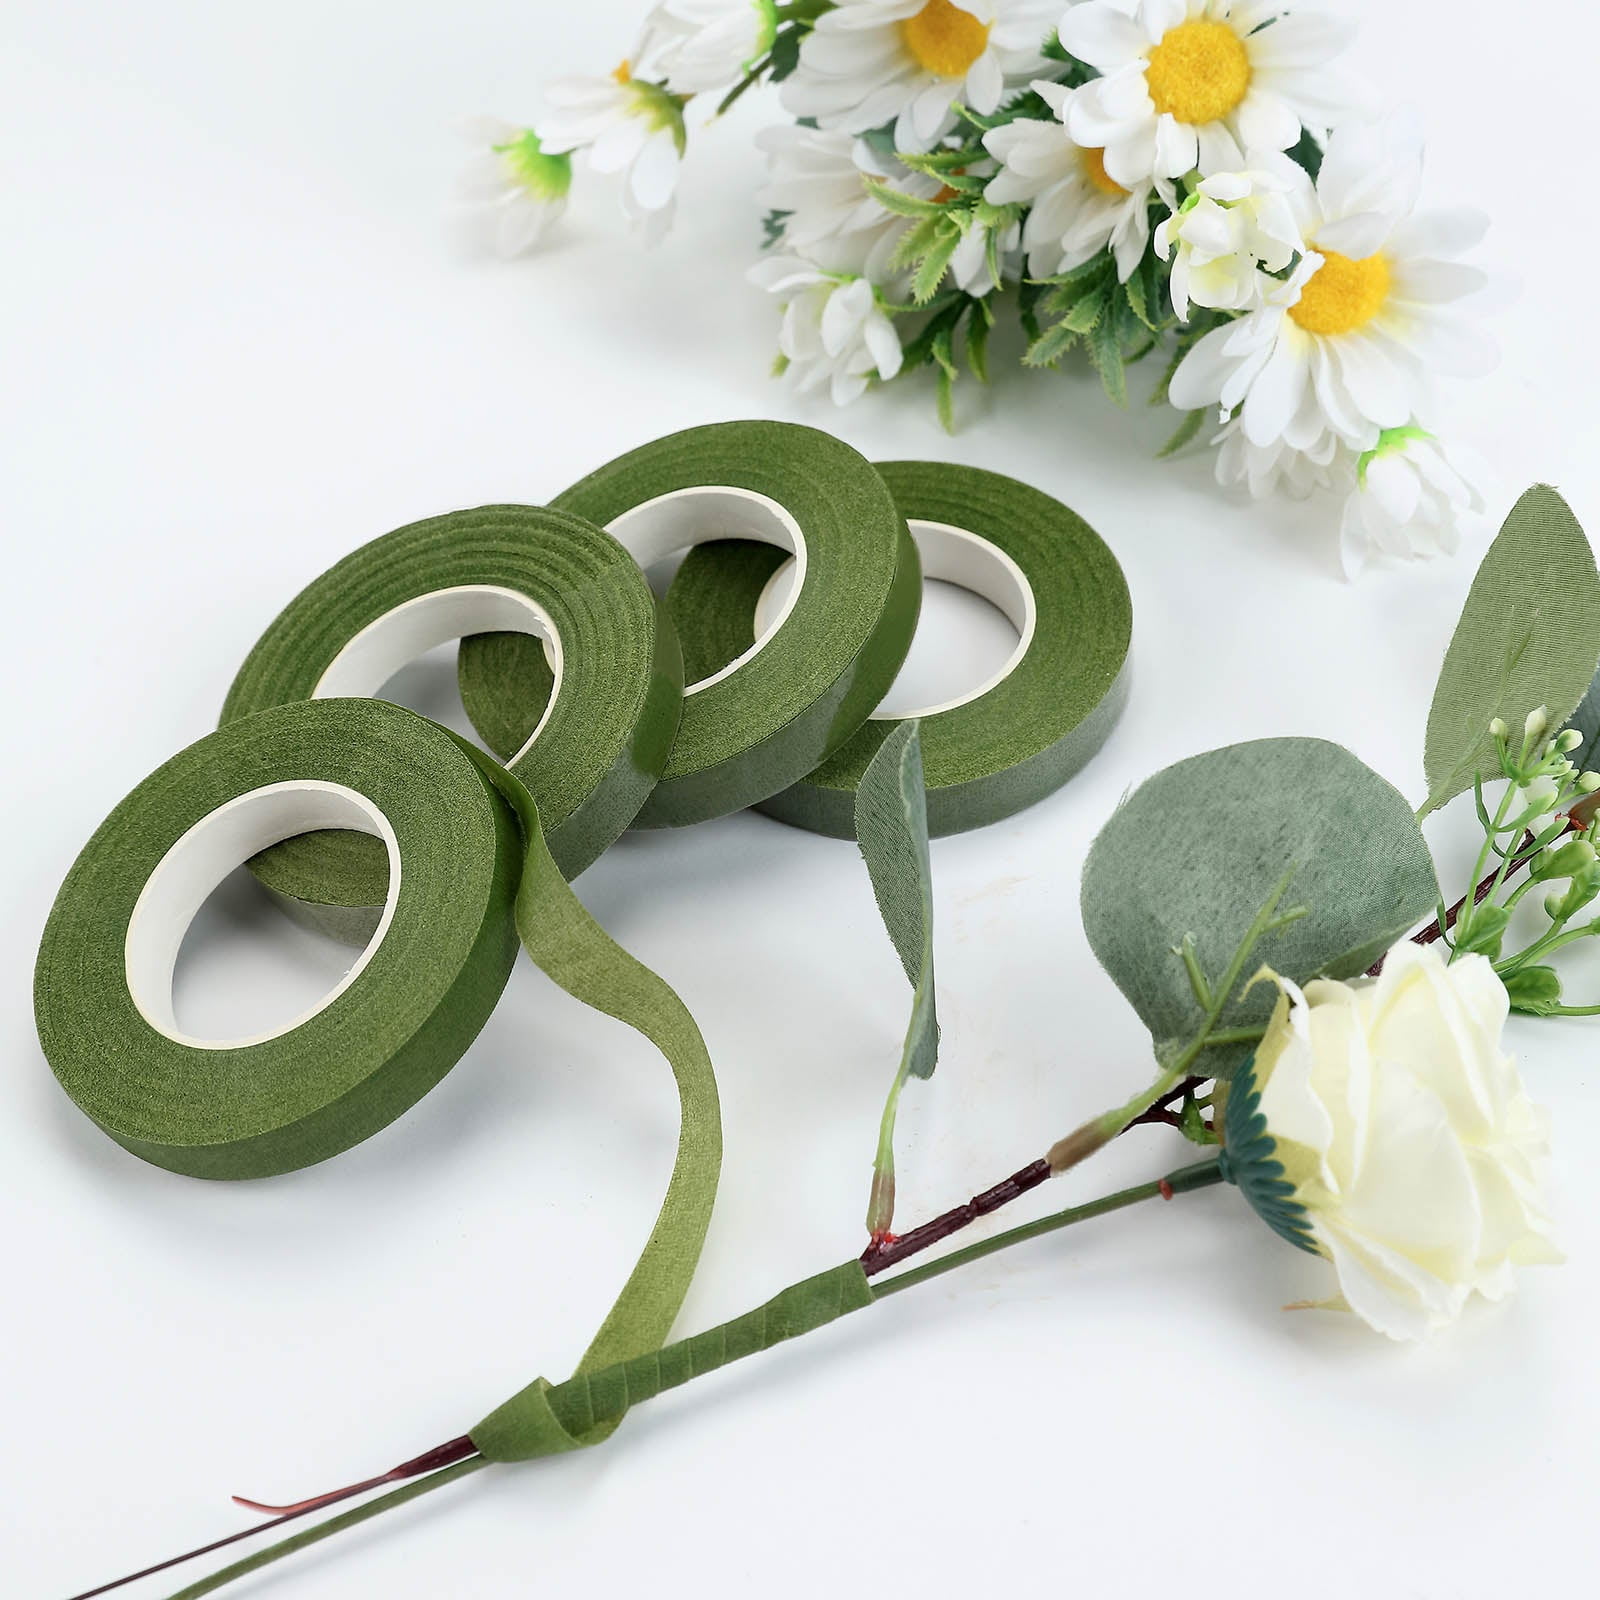 1/2pcs 30 Yard 12mm Self-adhesive Bouquet Floral Stem Tape Artificial Flower  Stamen Wrapping Florist Green Tapes Flower Supplies